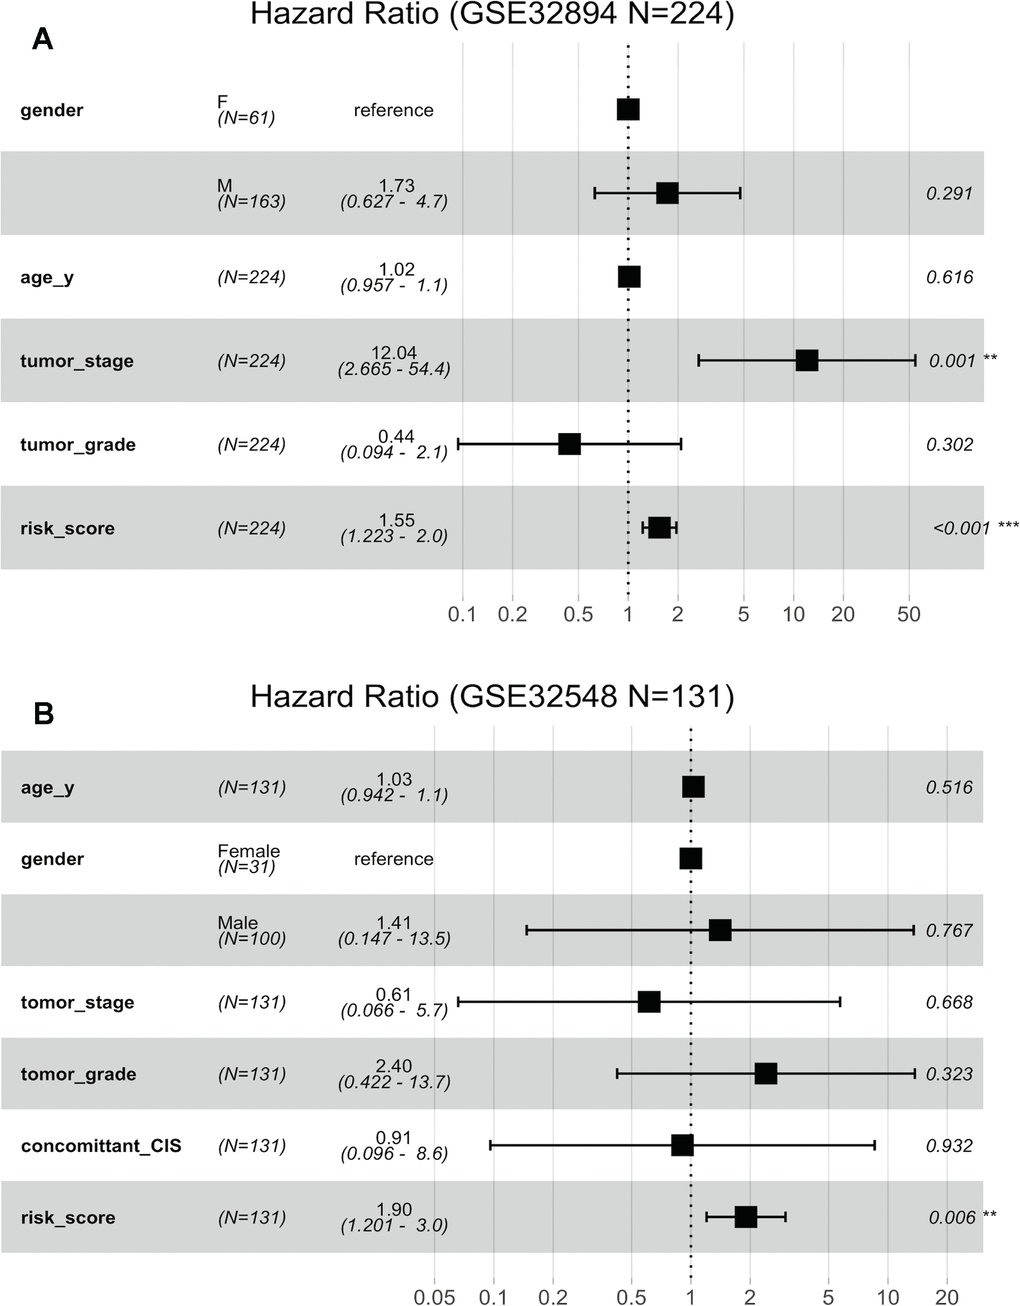 Forest plots showing the hazard ratios (HRs) with 95% confidence intervals (95% CIs) based on the multivariate Cox regression results. (A) Risk score and tumour stage are dependent of age, sex and histopathological grade in GSE32894. (B) Risk score is dependent of sex, age, tumour stage, histopathological grade and concomitant CIS in GSE32894.